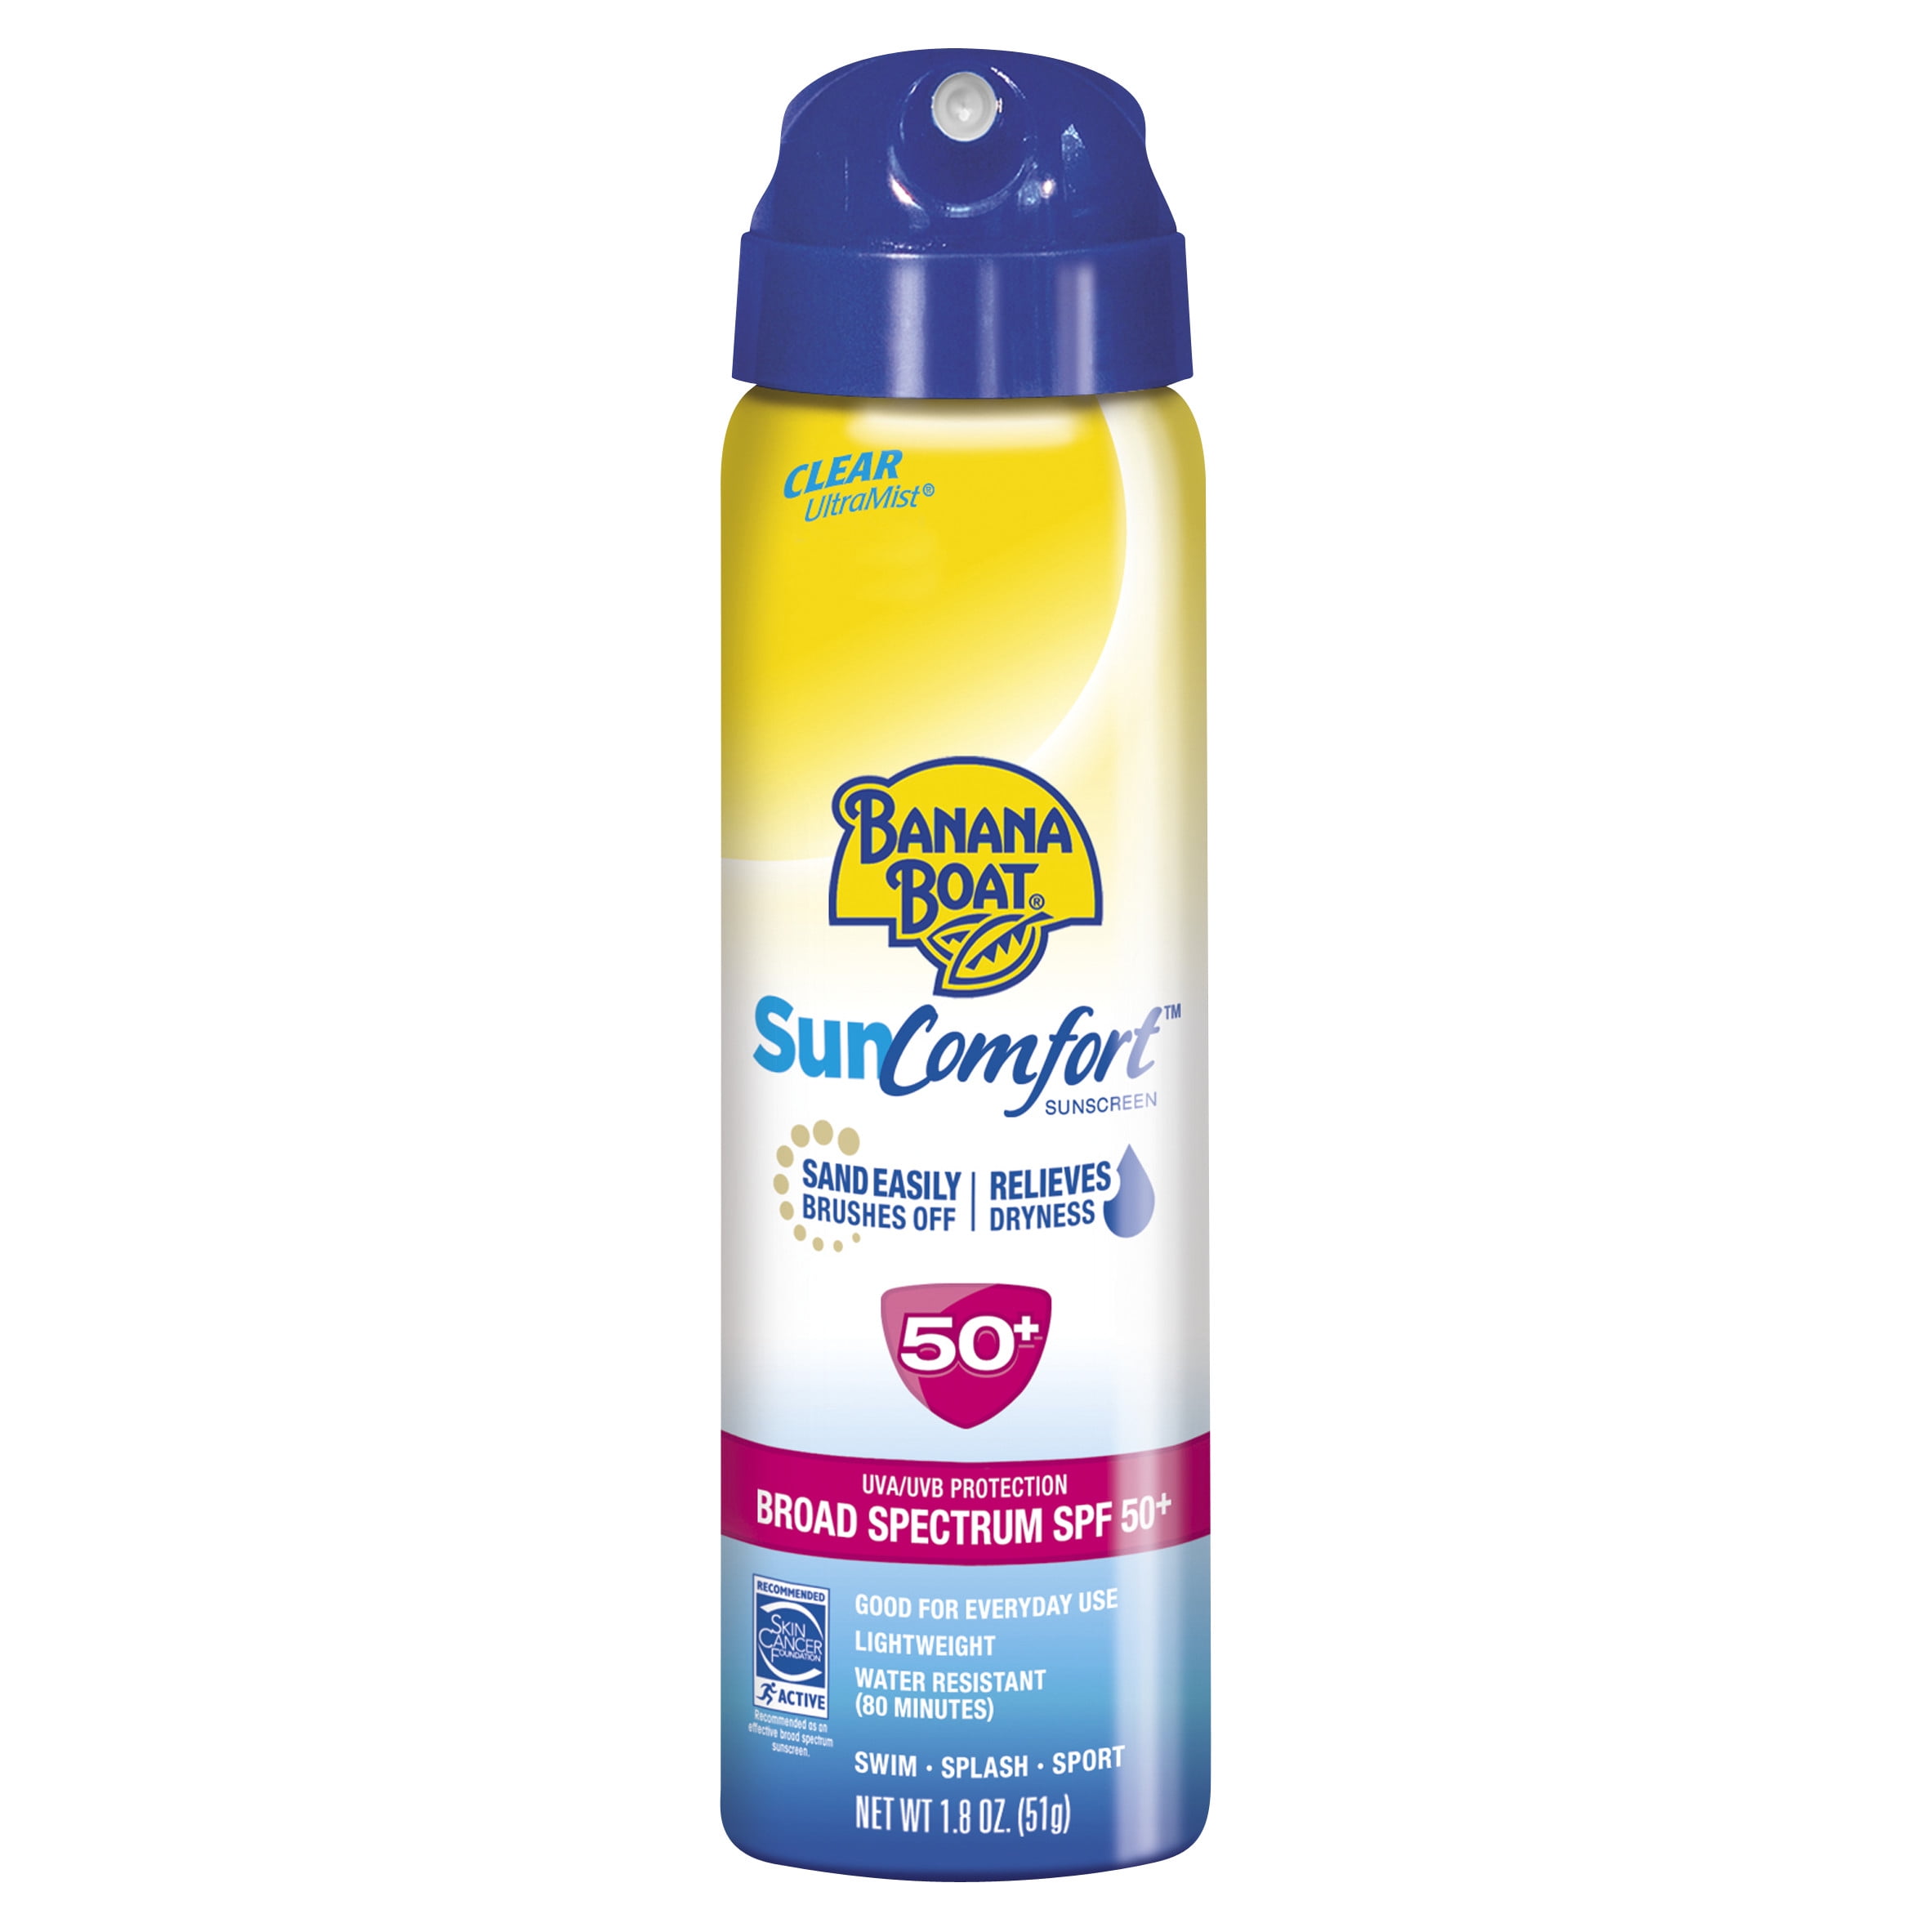 travel with spray sunscreen